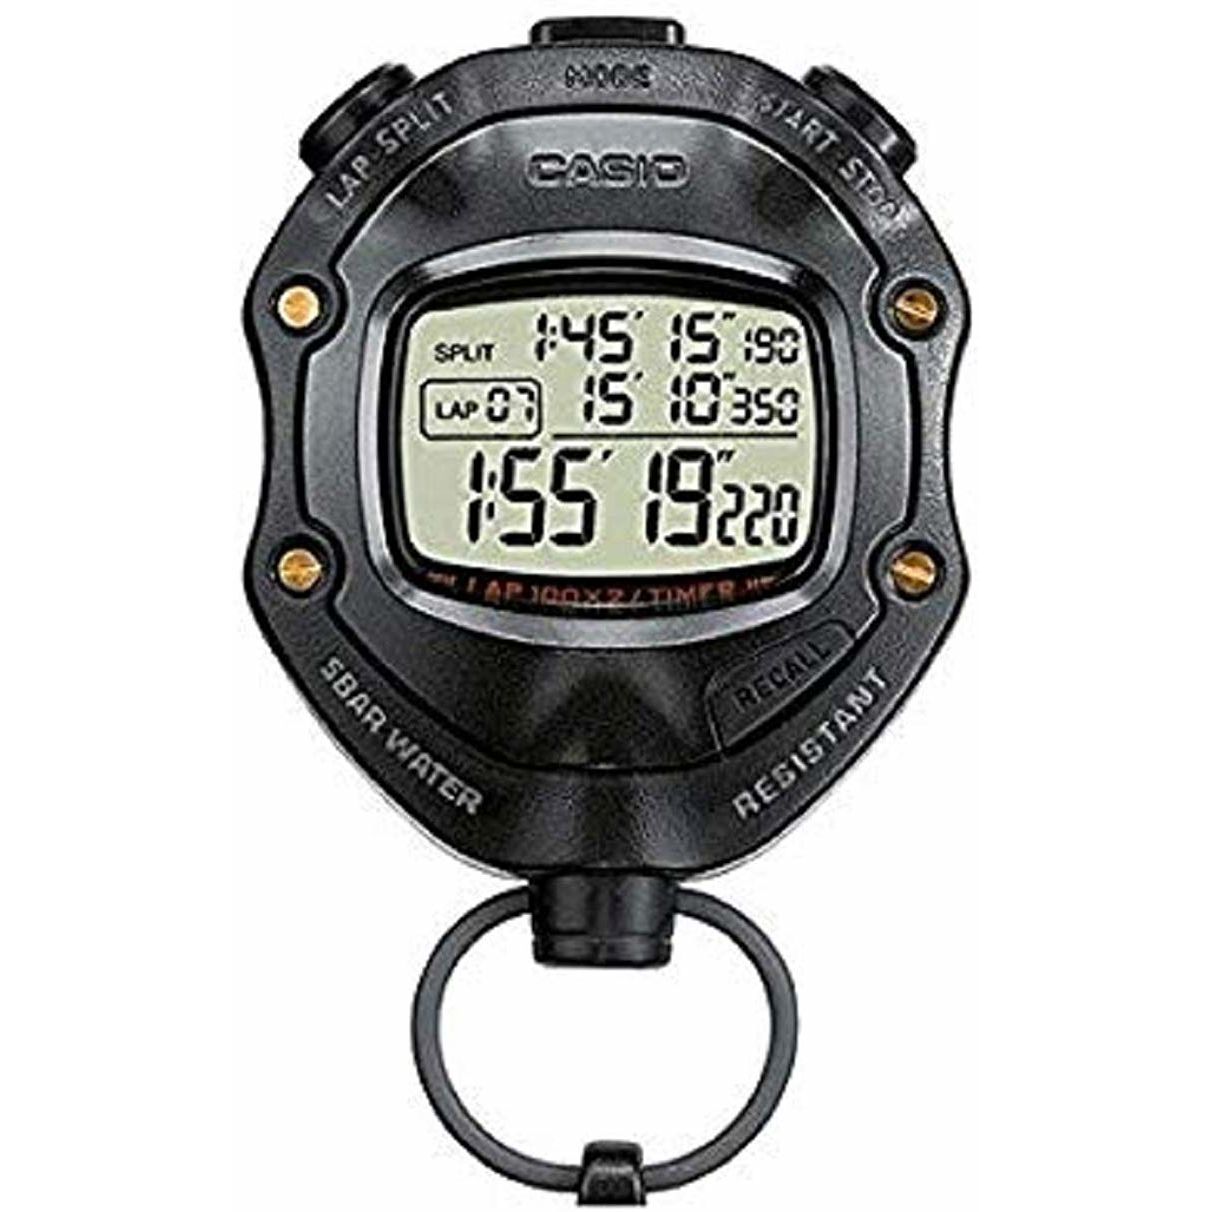 Casio Handheld Stopwatch HS-80TW-1DF| Handheld Stopwatch | Sports | Fitness | Athletes | Accurate | Lap Memory | Split Time | Durable | Measuring Performance | Halabh.com